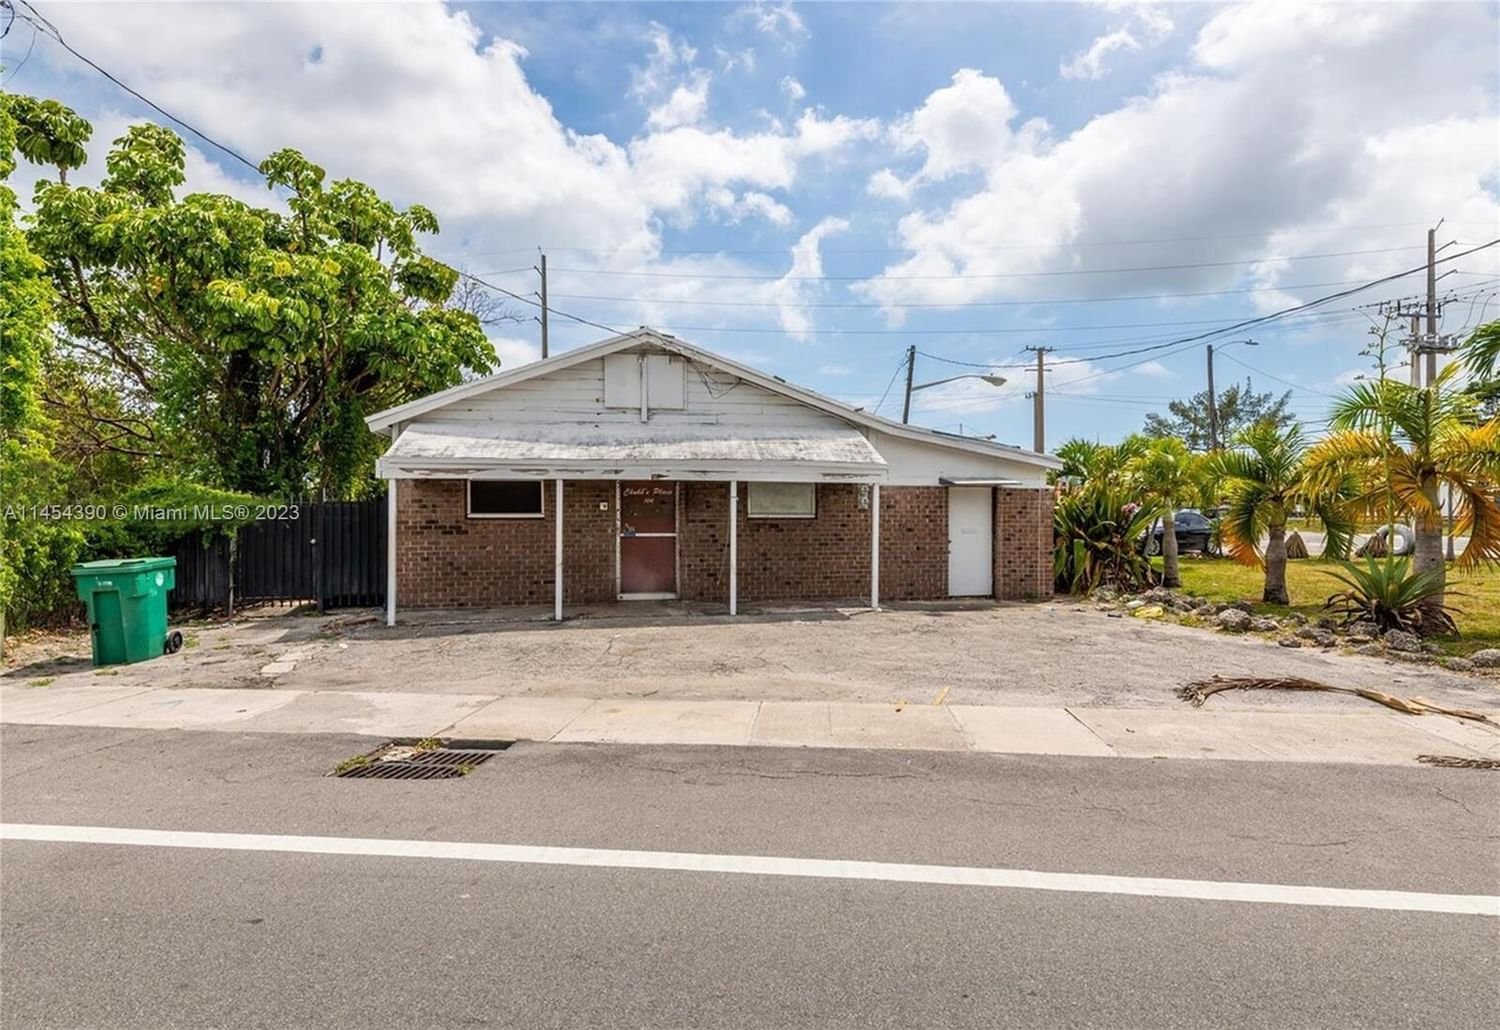 Real estate property located at 400 1st St, Broward County, Dania Beach, FL